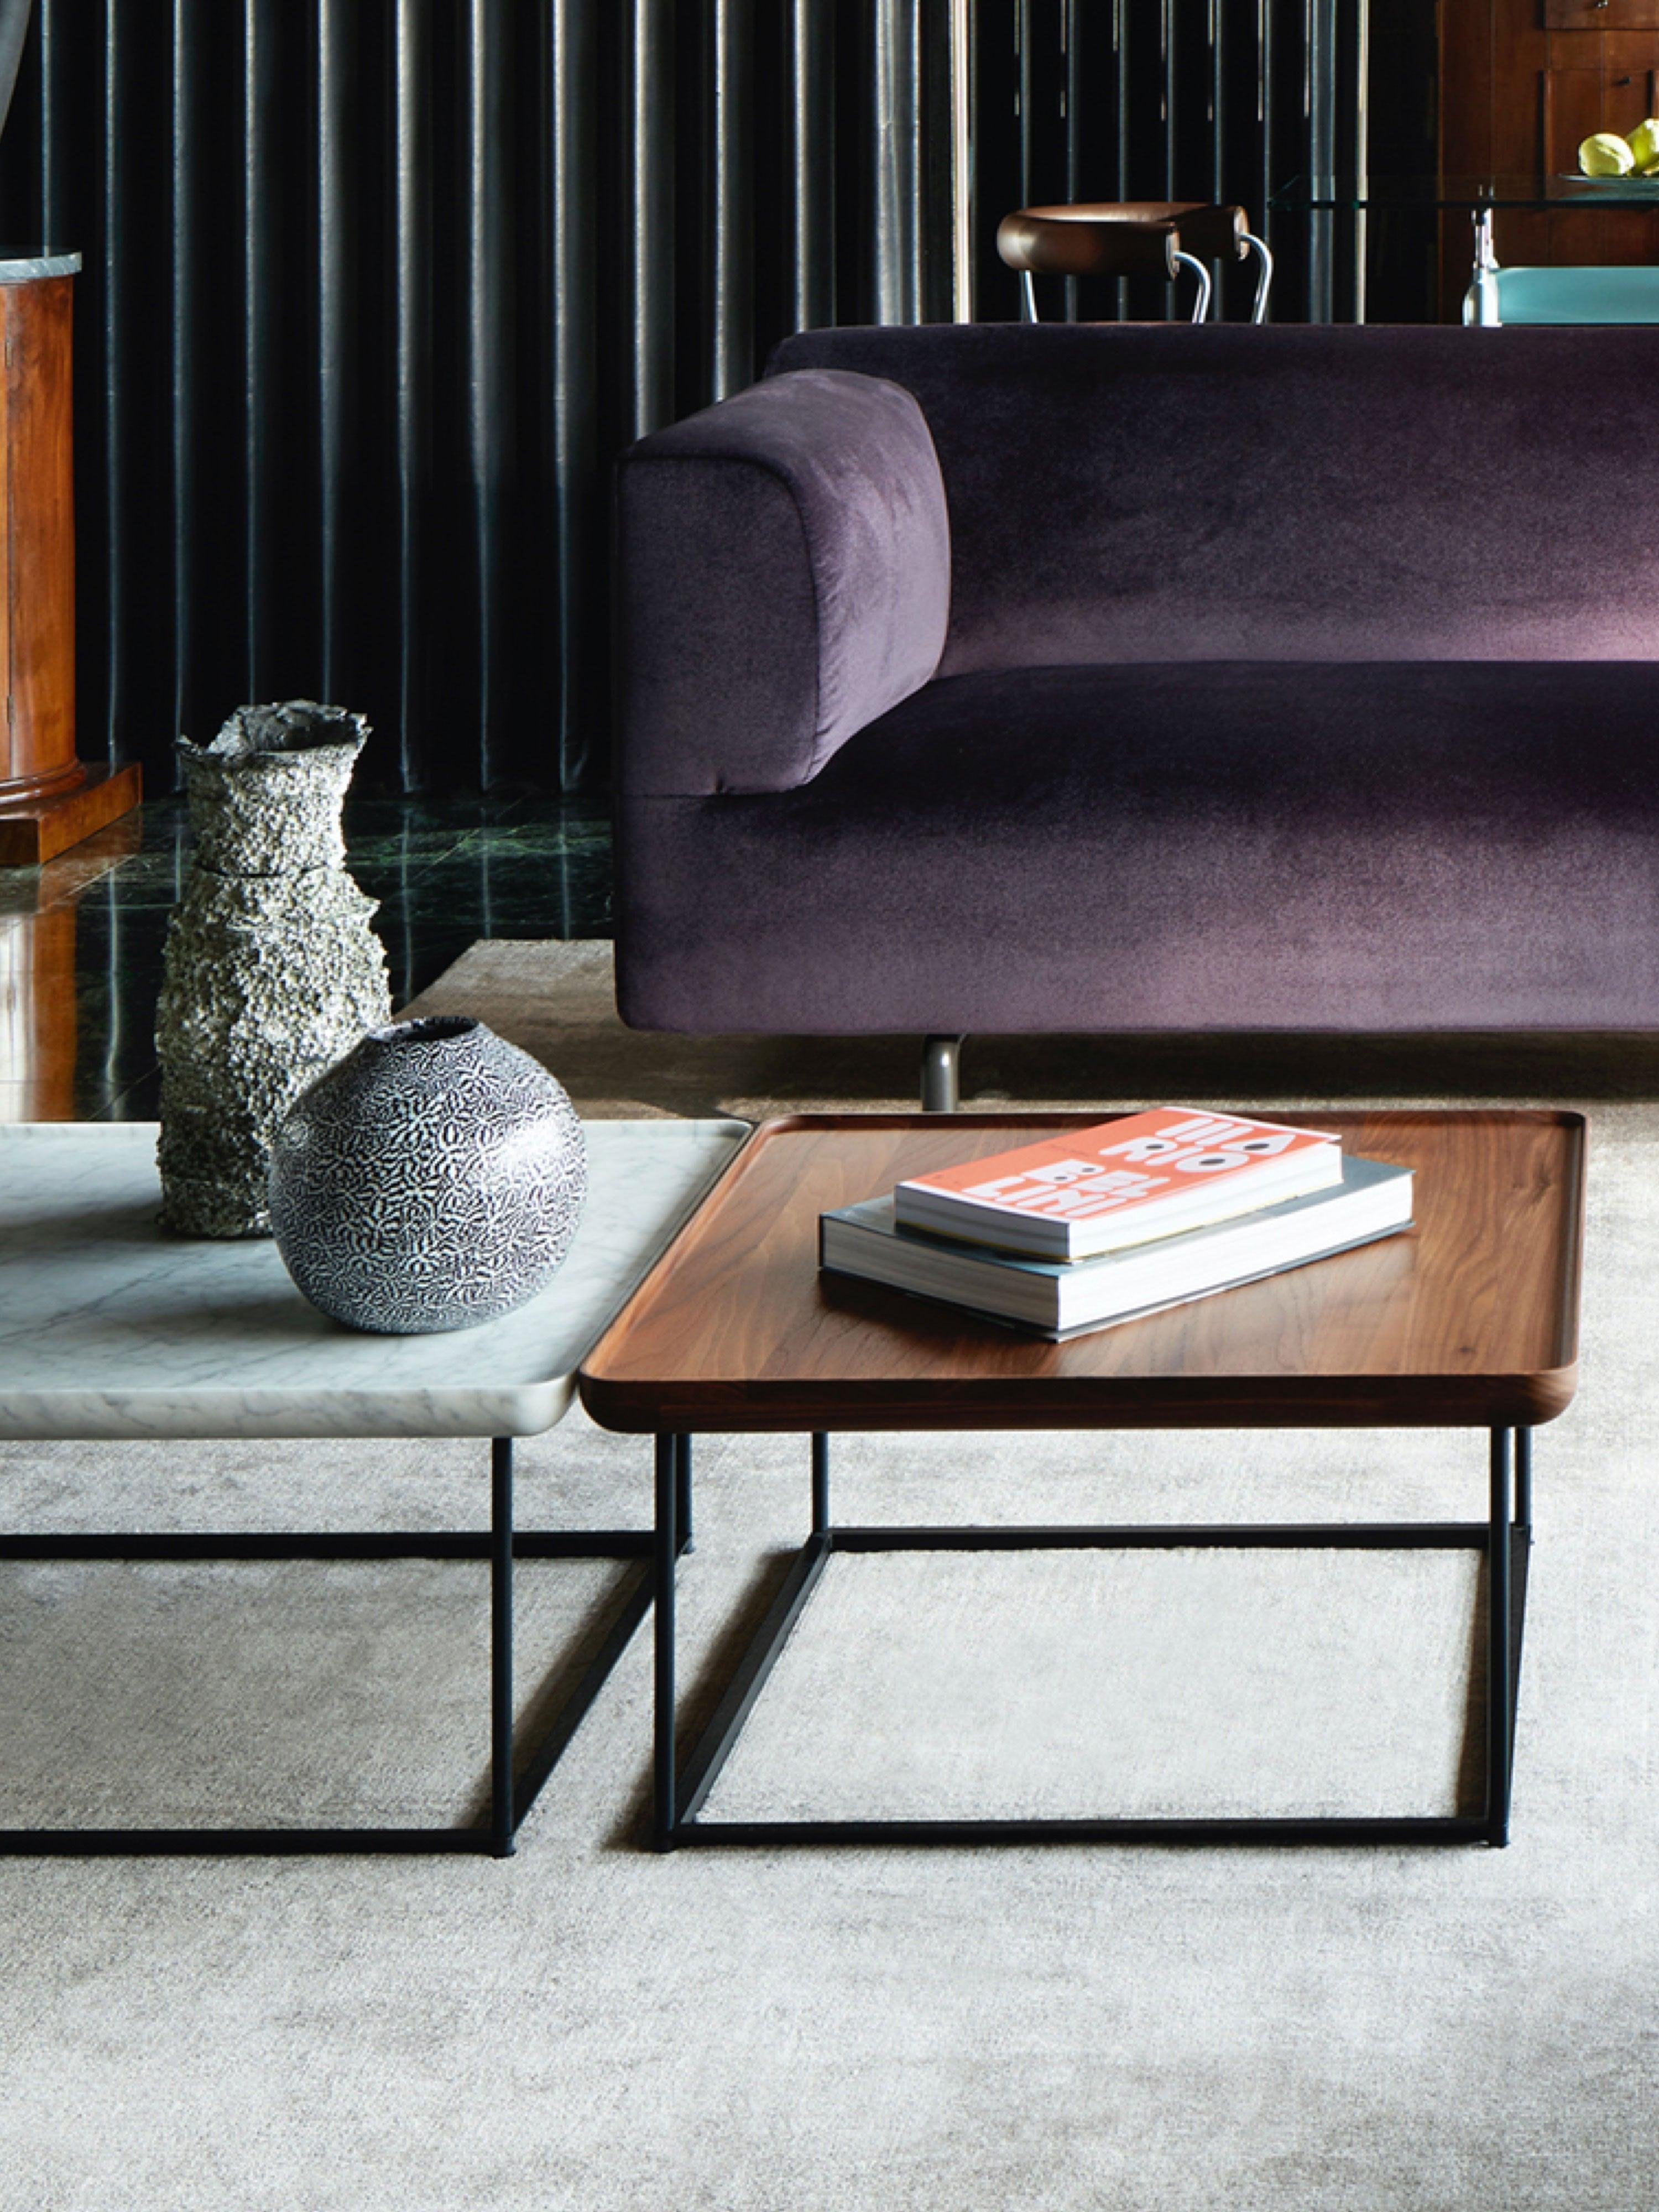 Named for the Japanese term for a tray, this table is designed to encourage hospitality and sharing. The walnut top has gently curved edges with a subtle lip and is supported by a sophisticated matte black metal base.

Cassina was established in